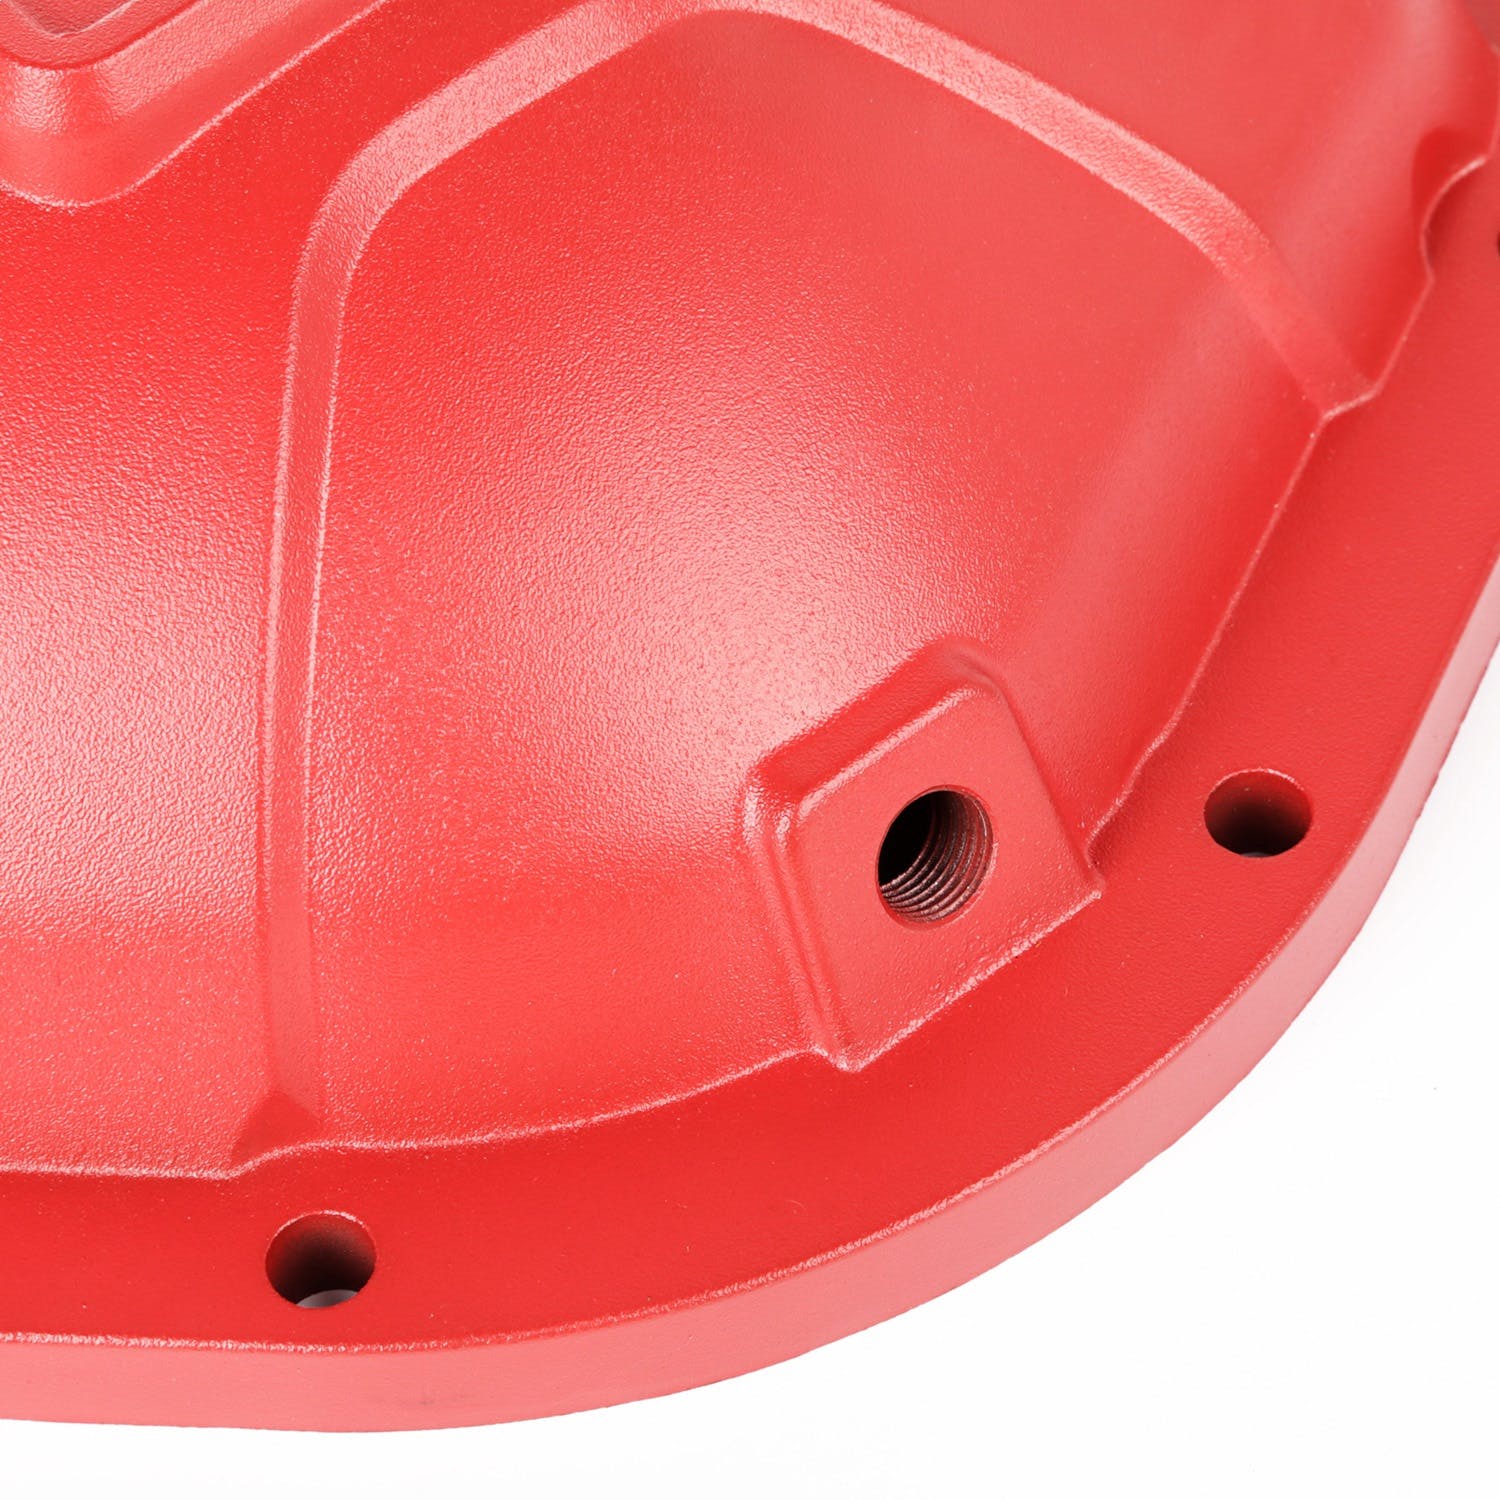 Alloy USA 11212 Aluminum Differential Cover, Dana 44, Red